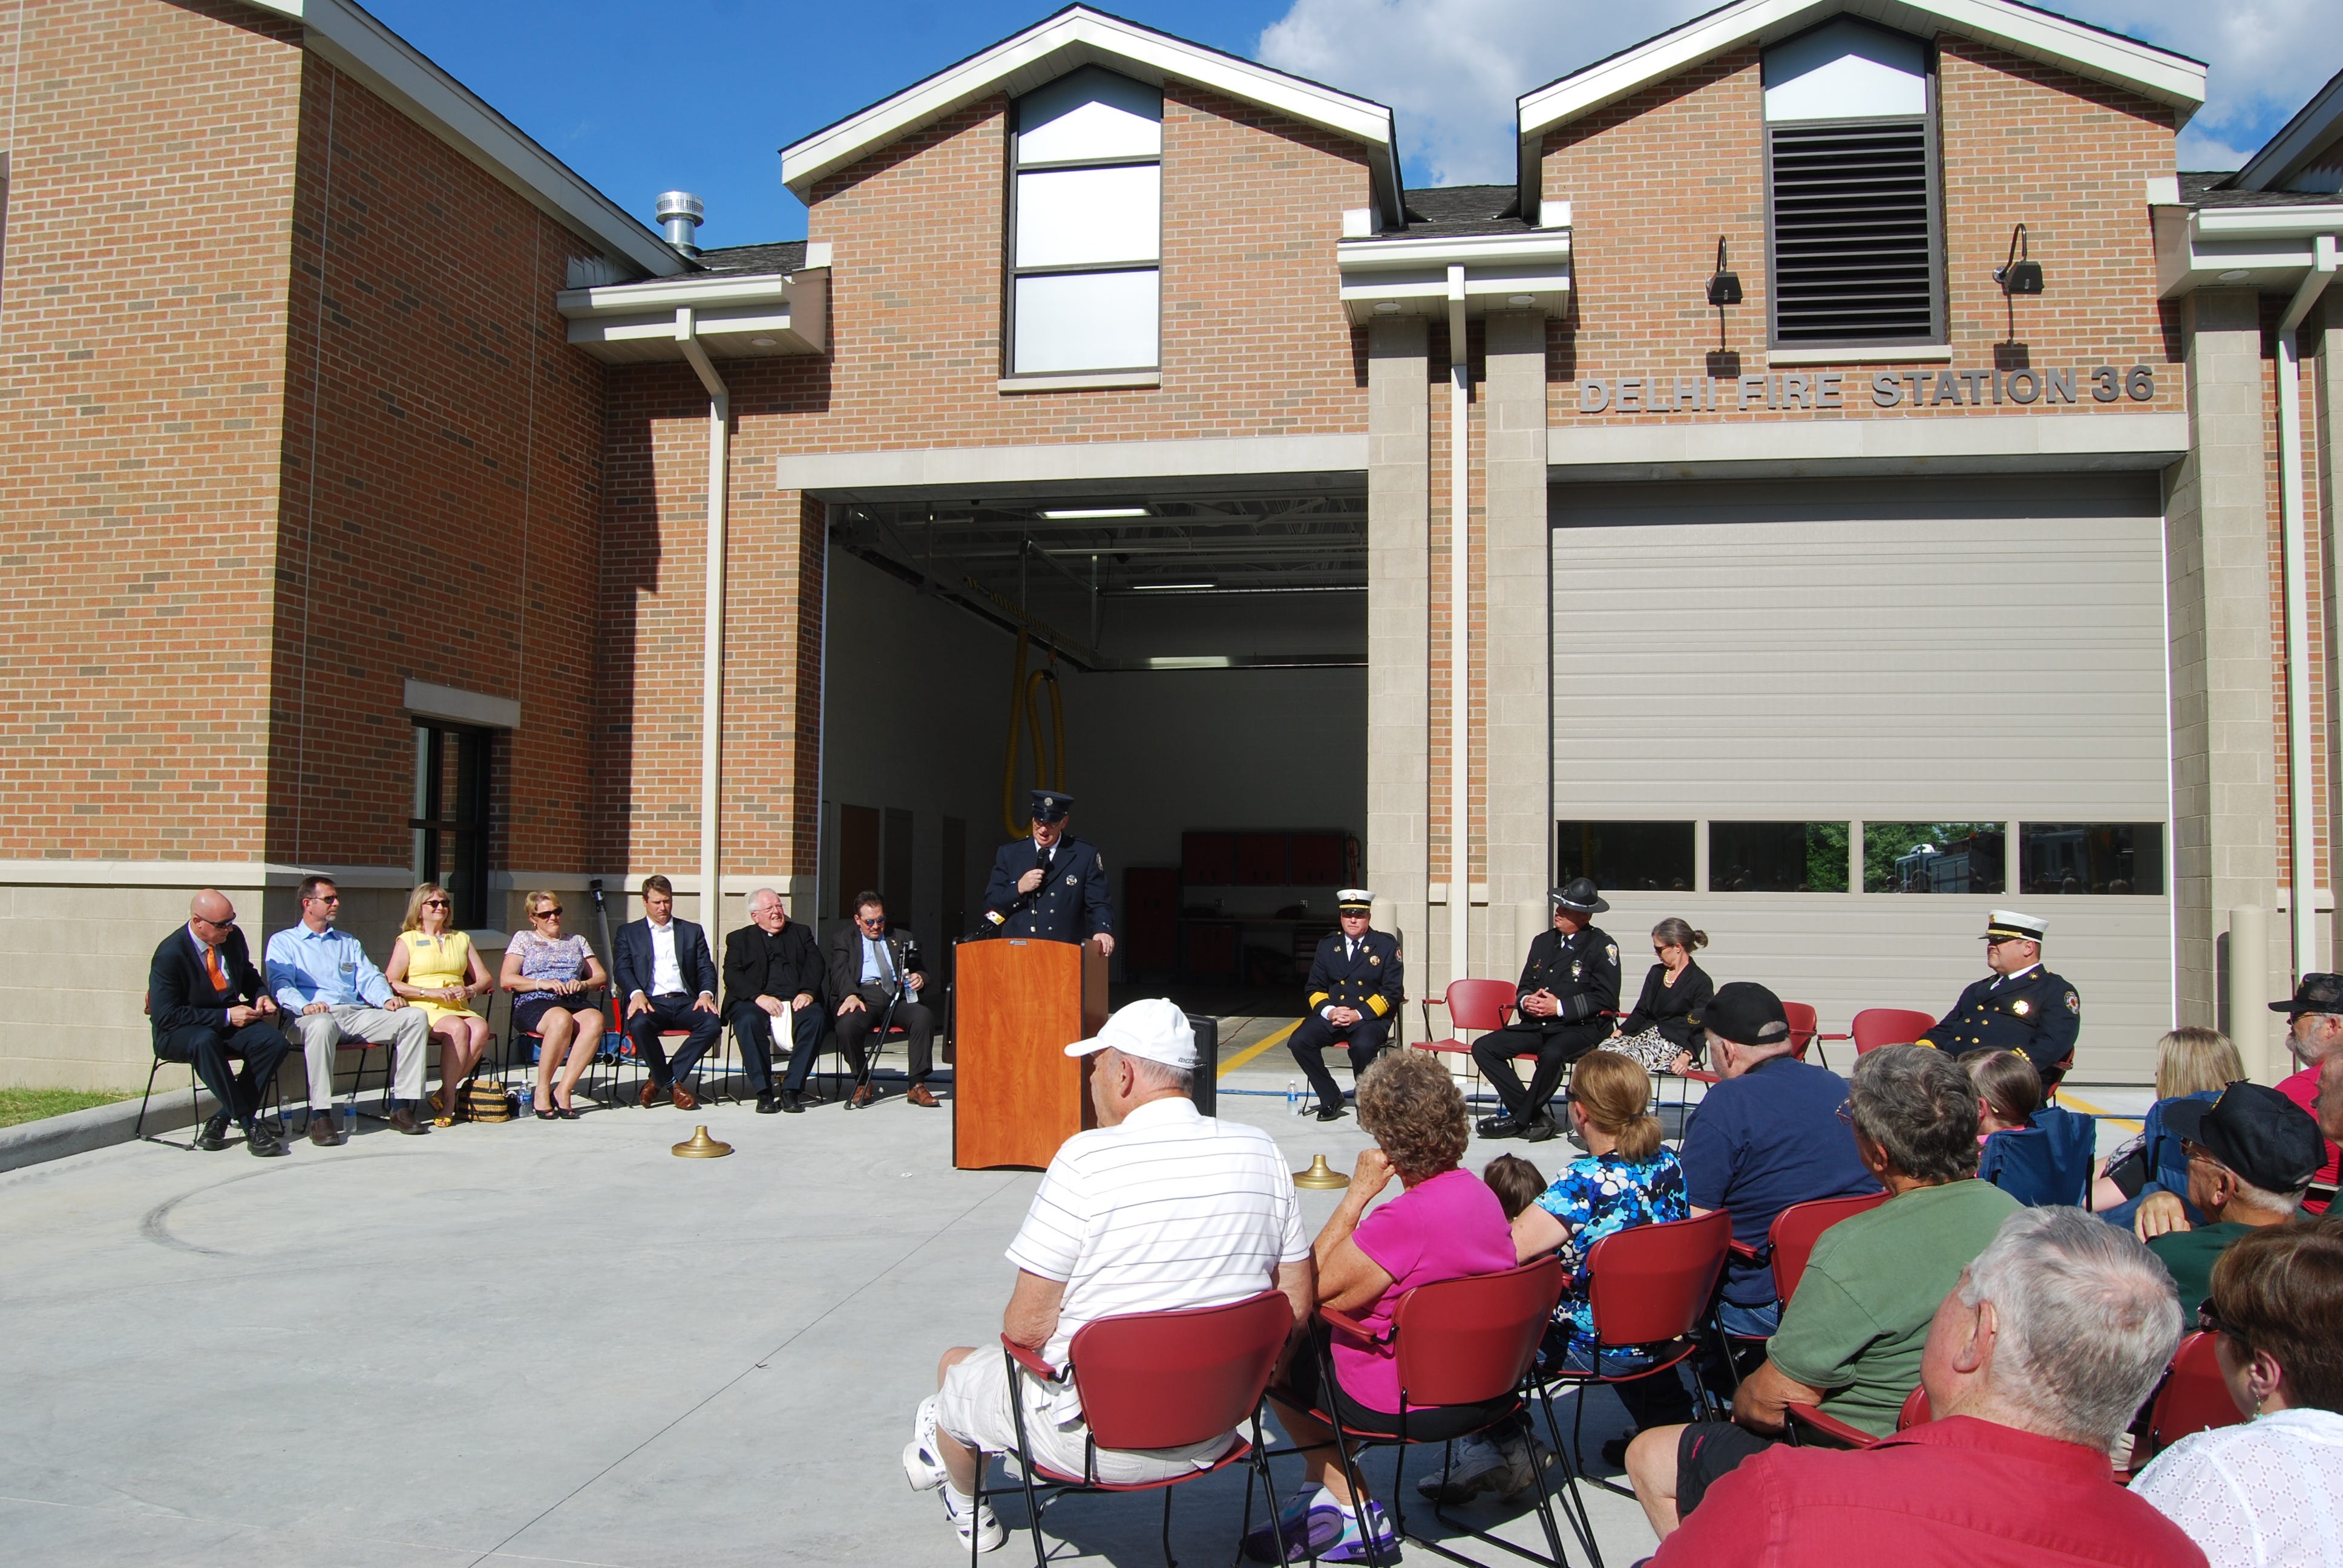 Delhi Township celebrates opening of new fire station